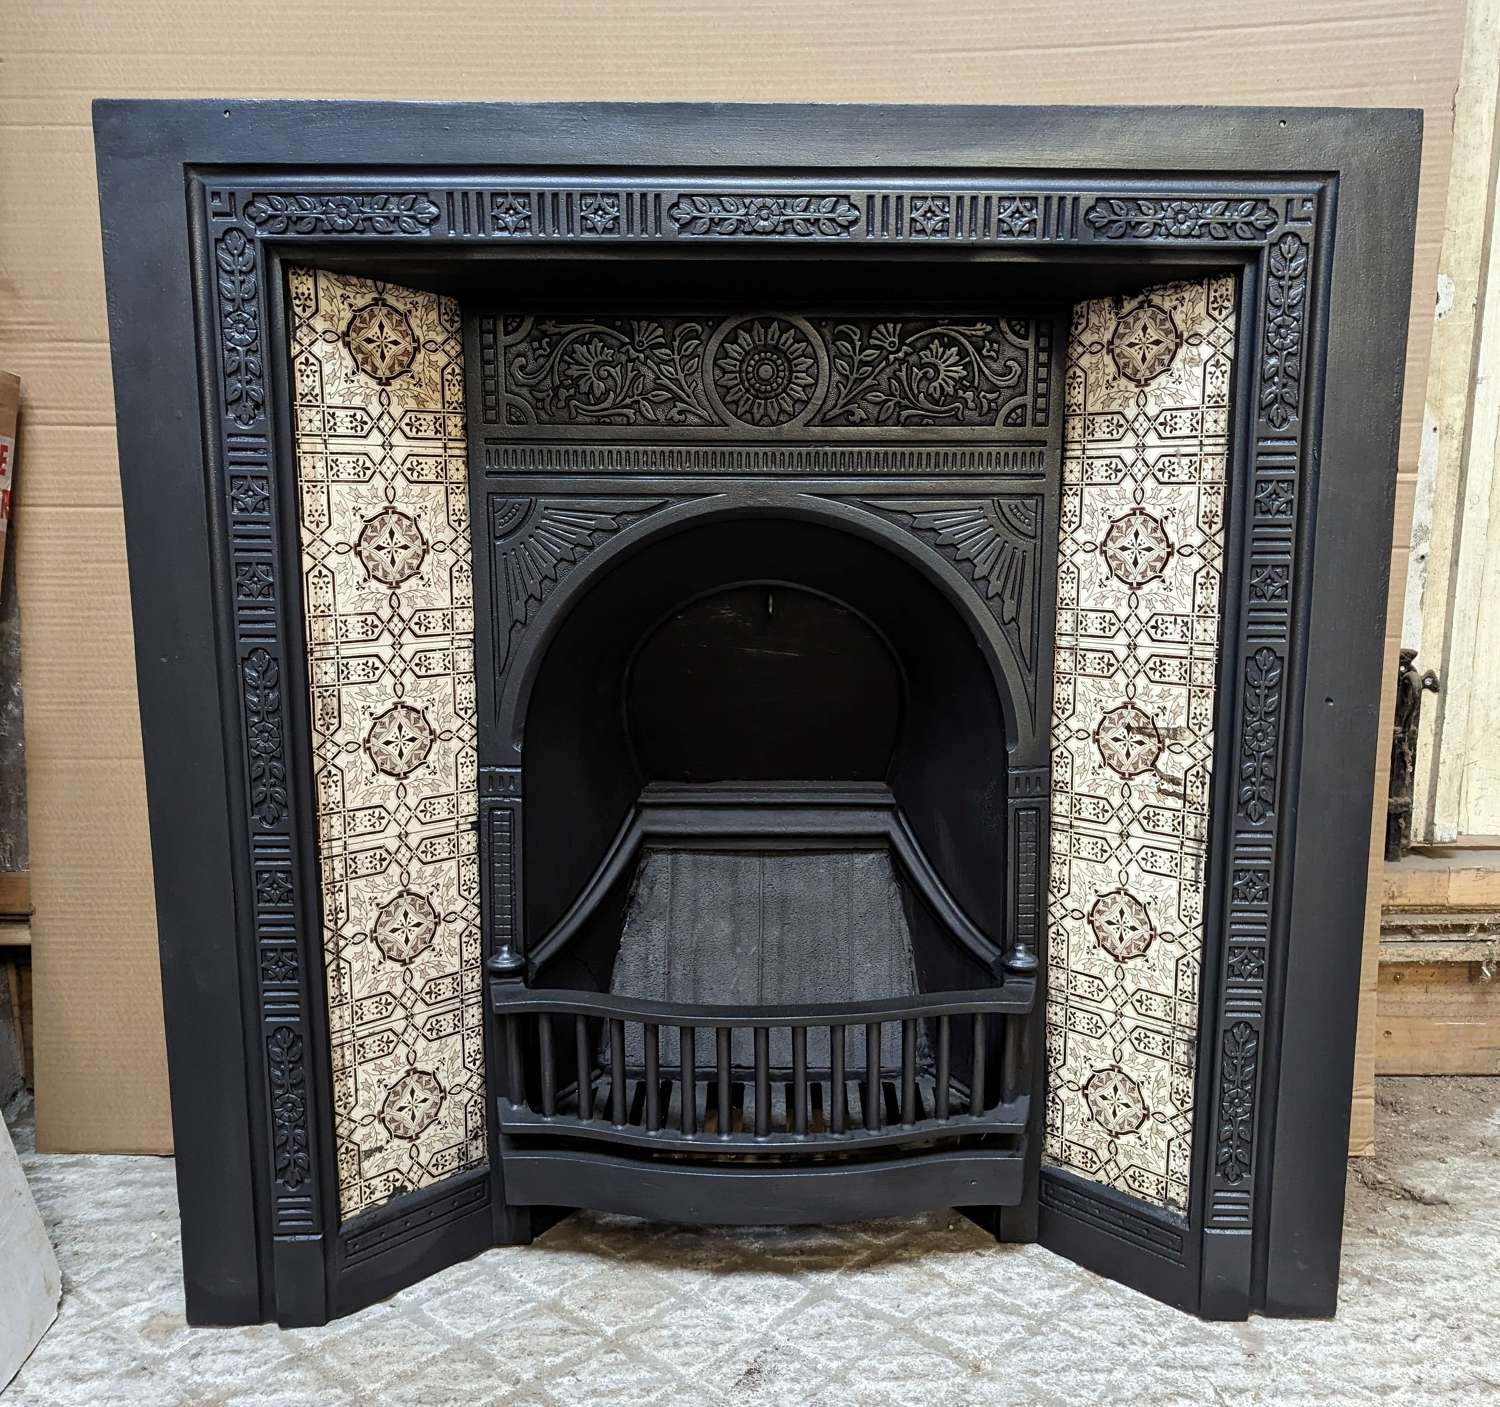 FI0078 A RECLAIMED CAST IRON TILED FIRE INSERT WITH ANTIQUE TILES